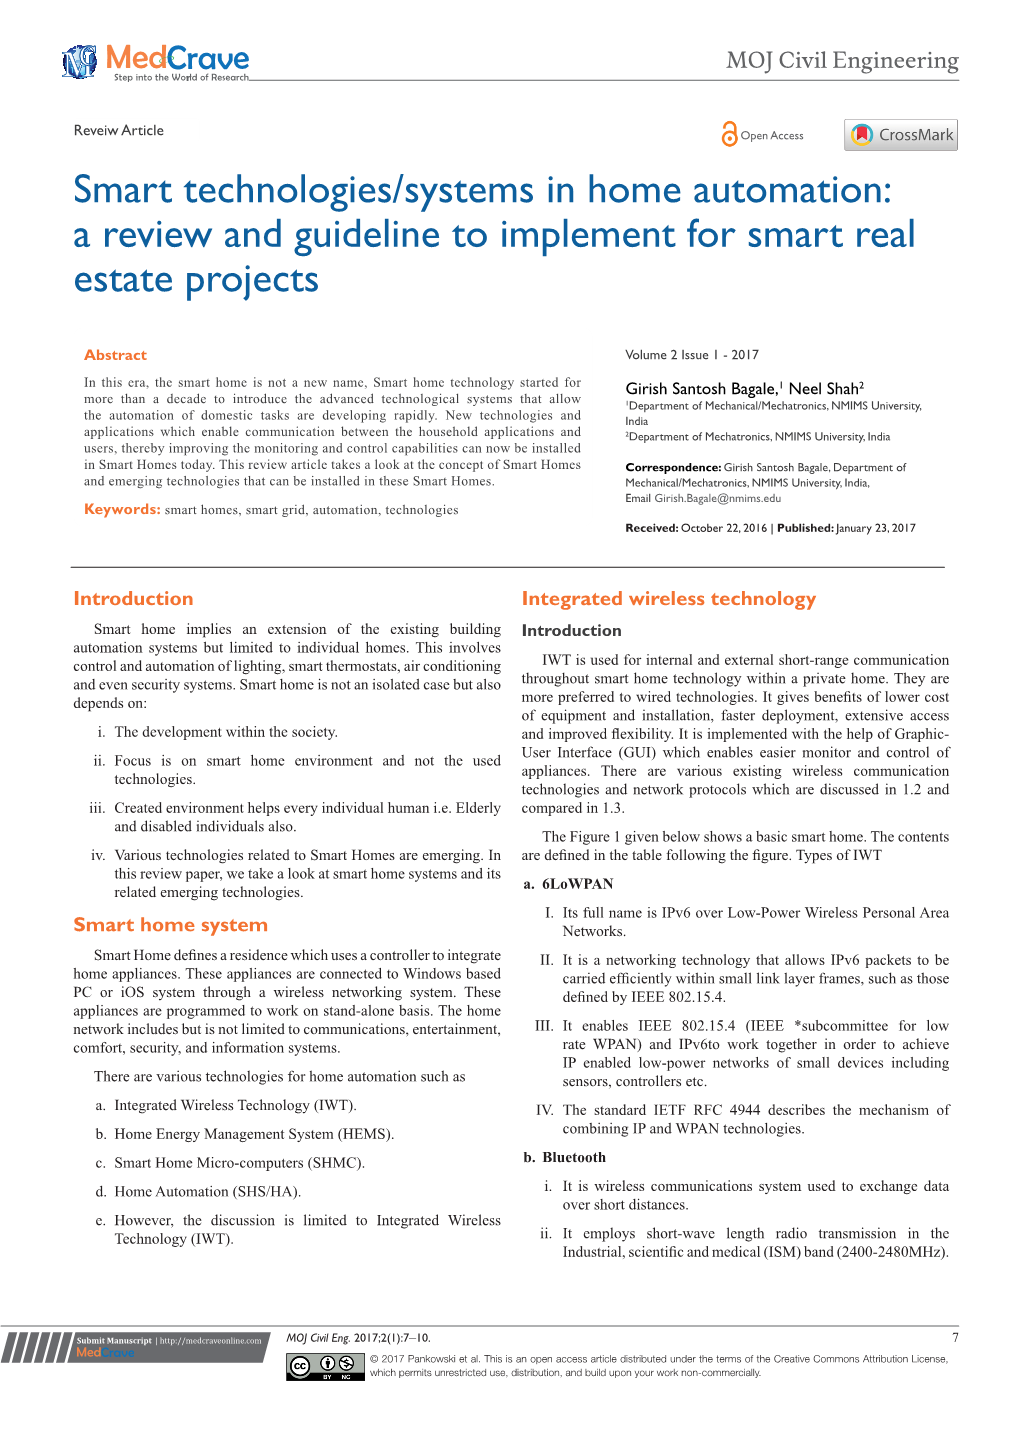 A Review and Guideline to Implement for Smart Real Estate Projects